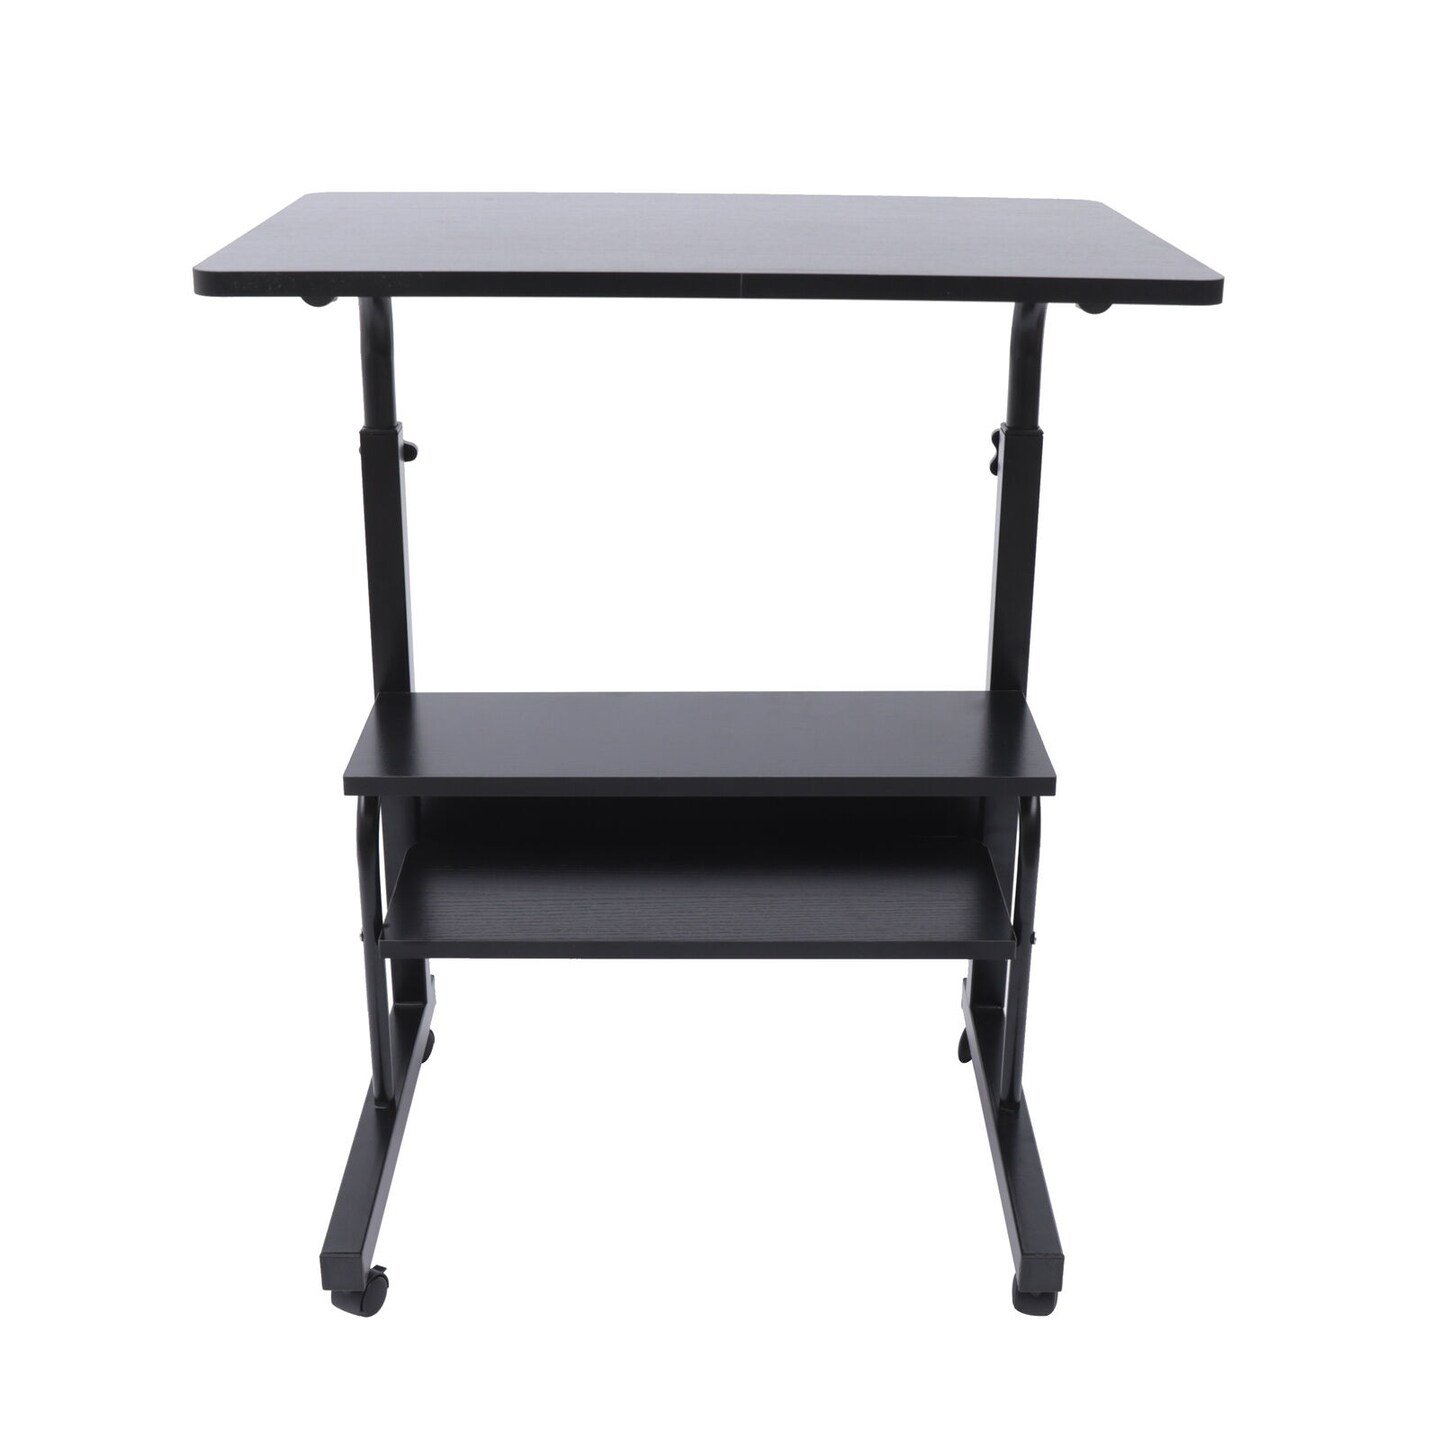 Kitcheniva 3 Layer Portable Tray Table Desk with Wheels